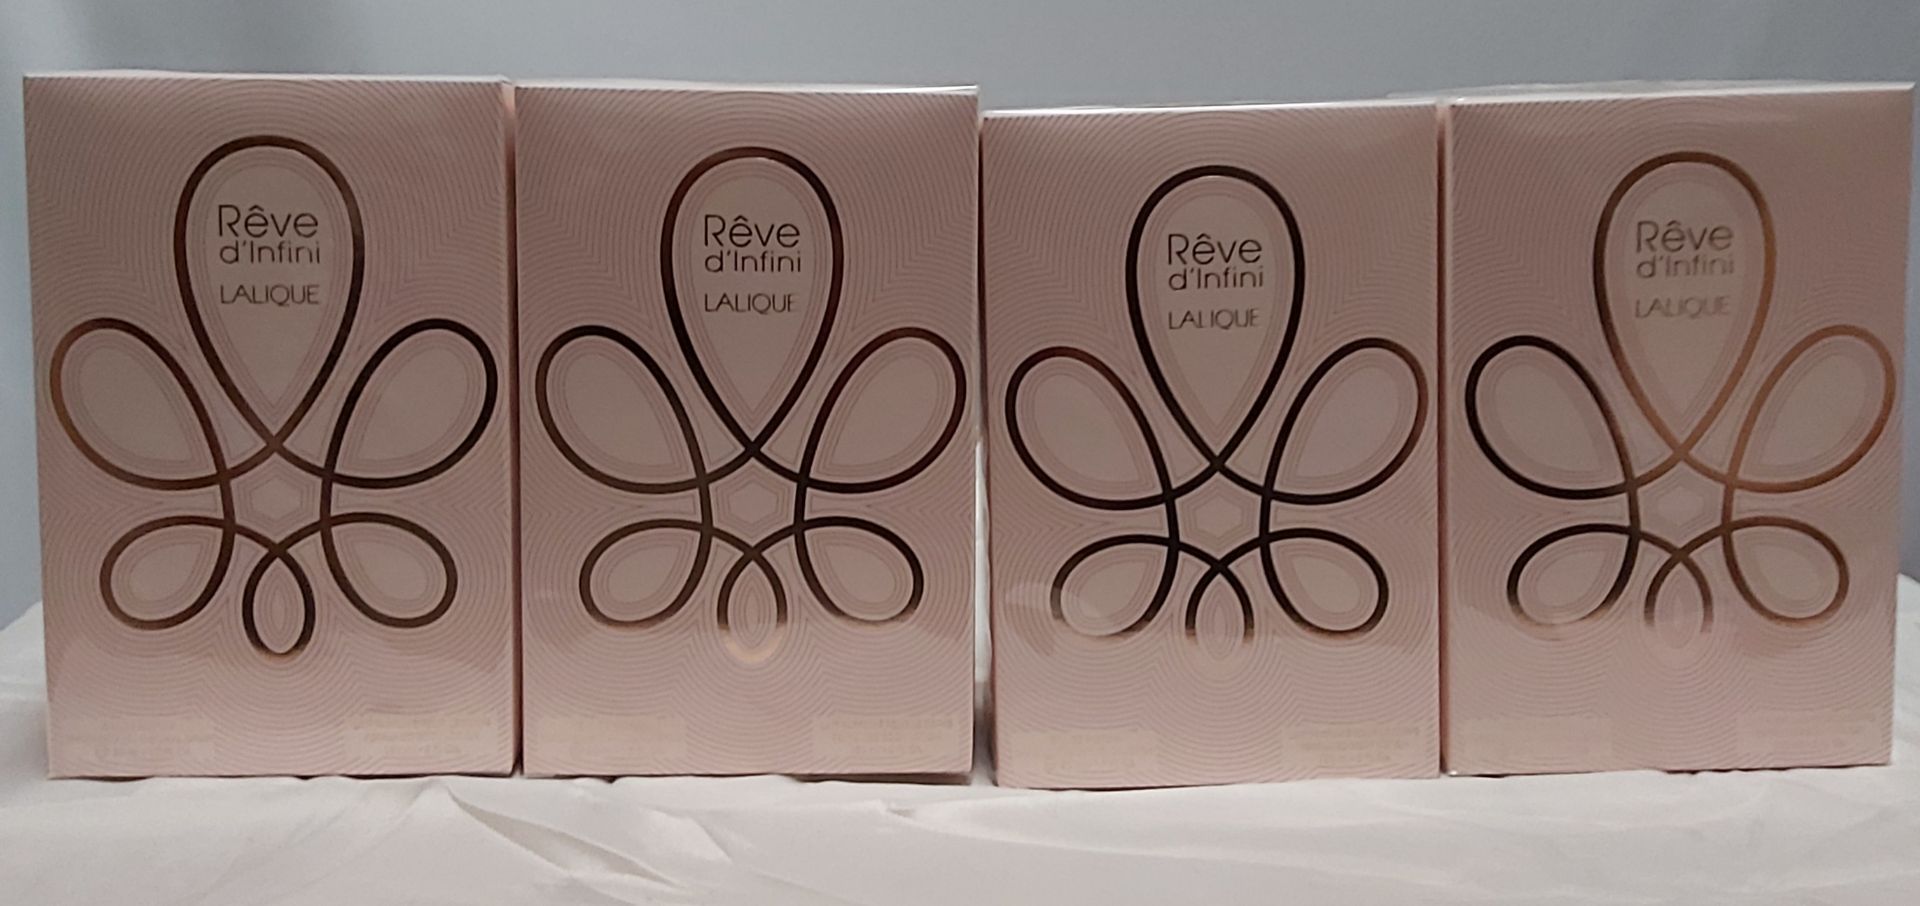 4 x Lalique Womens Reve D'Infini. 50ml EDP & 150ml Body Lotion. Condition New & Sealed. (RRP £288)